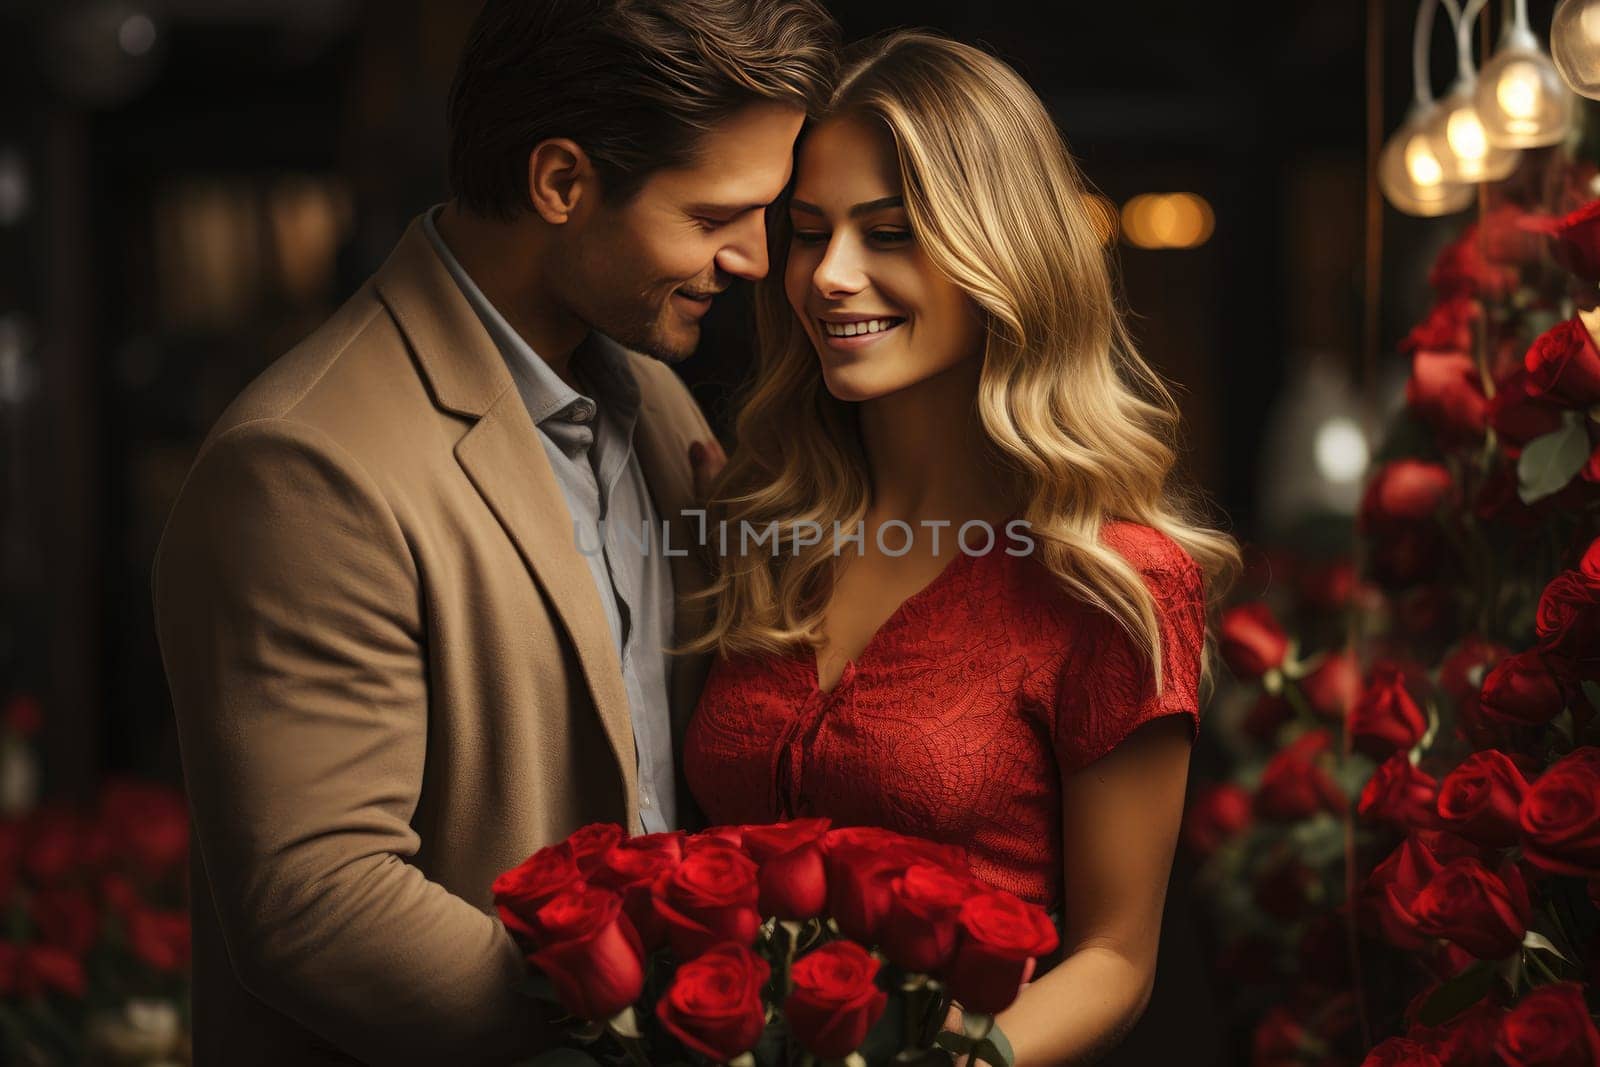 Symbols of Love: Man Giving Flowers in Honor of Valentine's Day by Yurich32